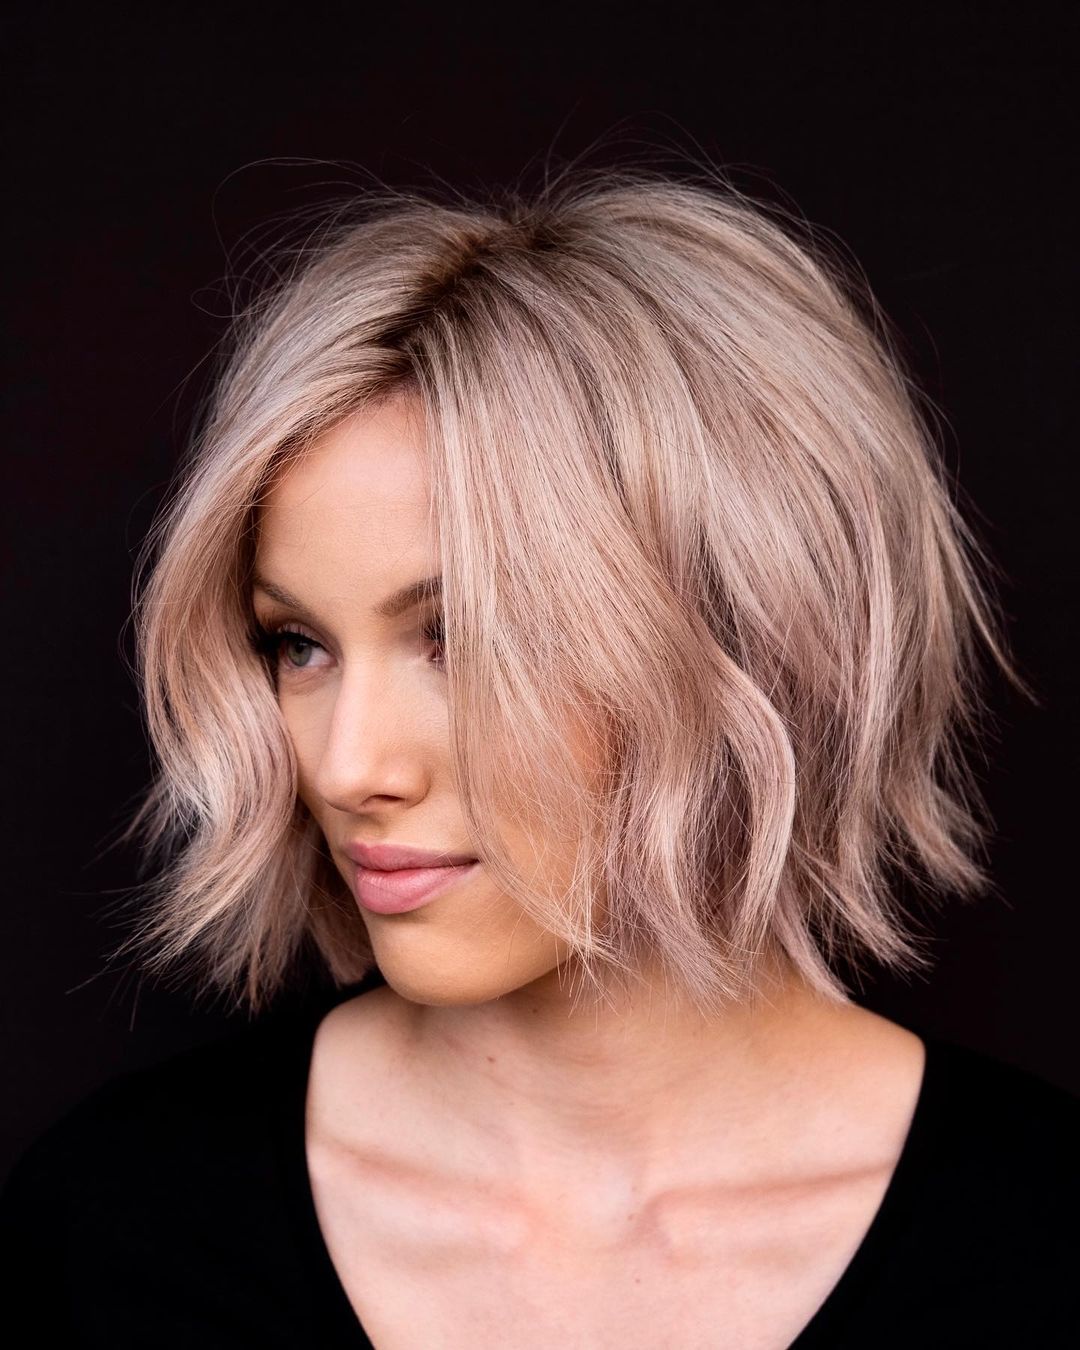 10 Short Layered Hairstyles - Bobs & Pixies with a Modern Twist - PoP